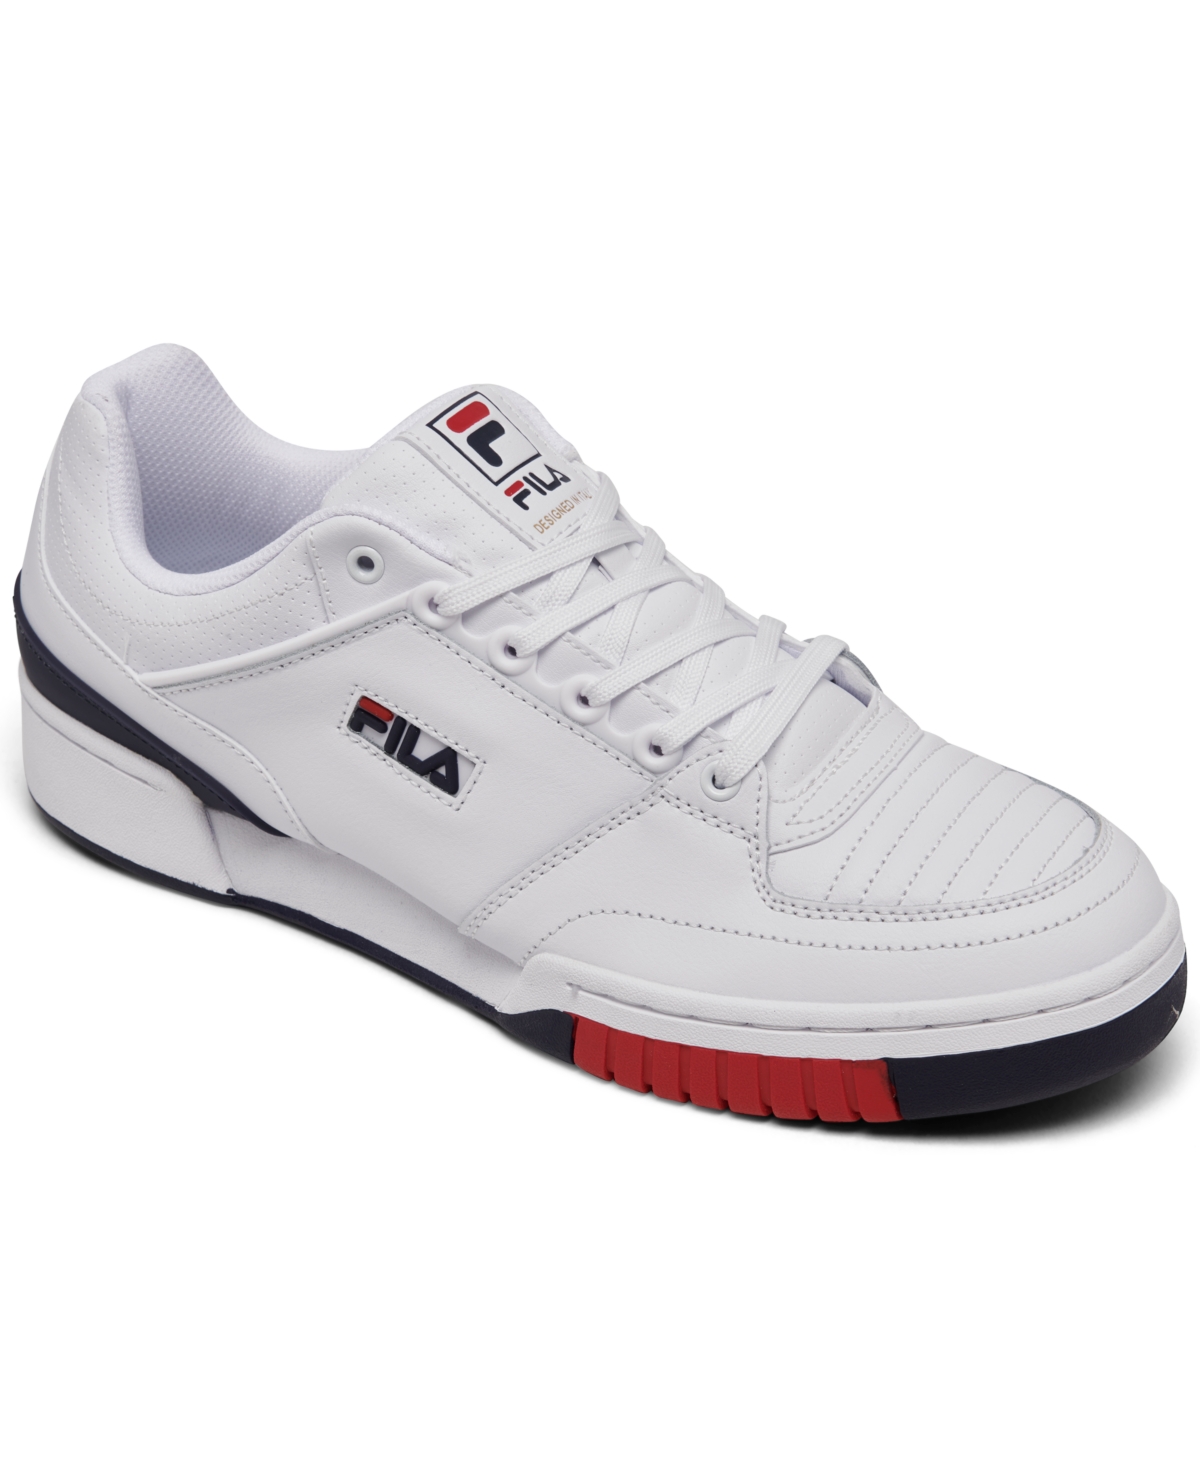 Men's Targa Nt Low Casual Tennis Sneakers from Finish Line - WHITE/NAVY/RED